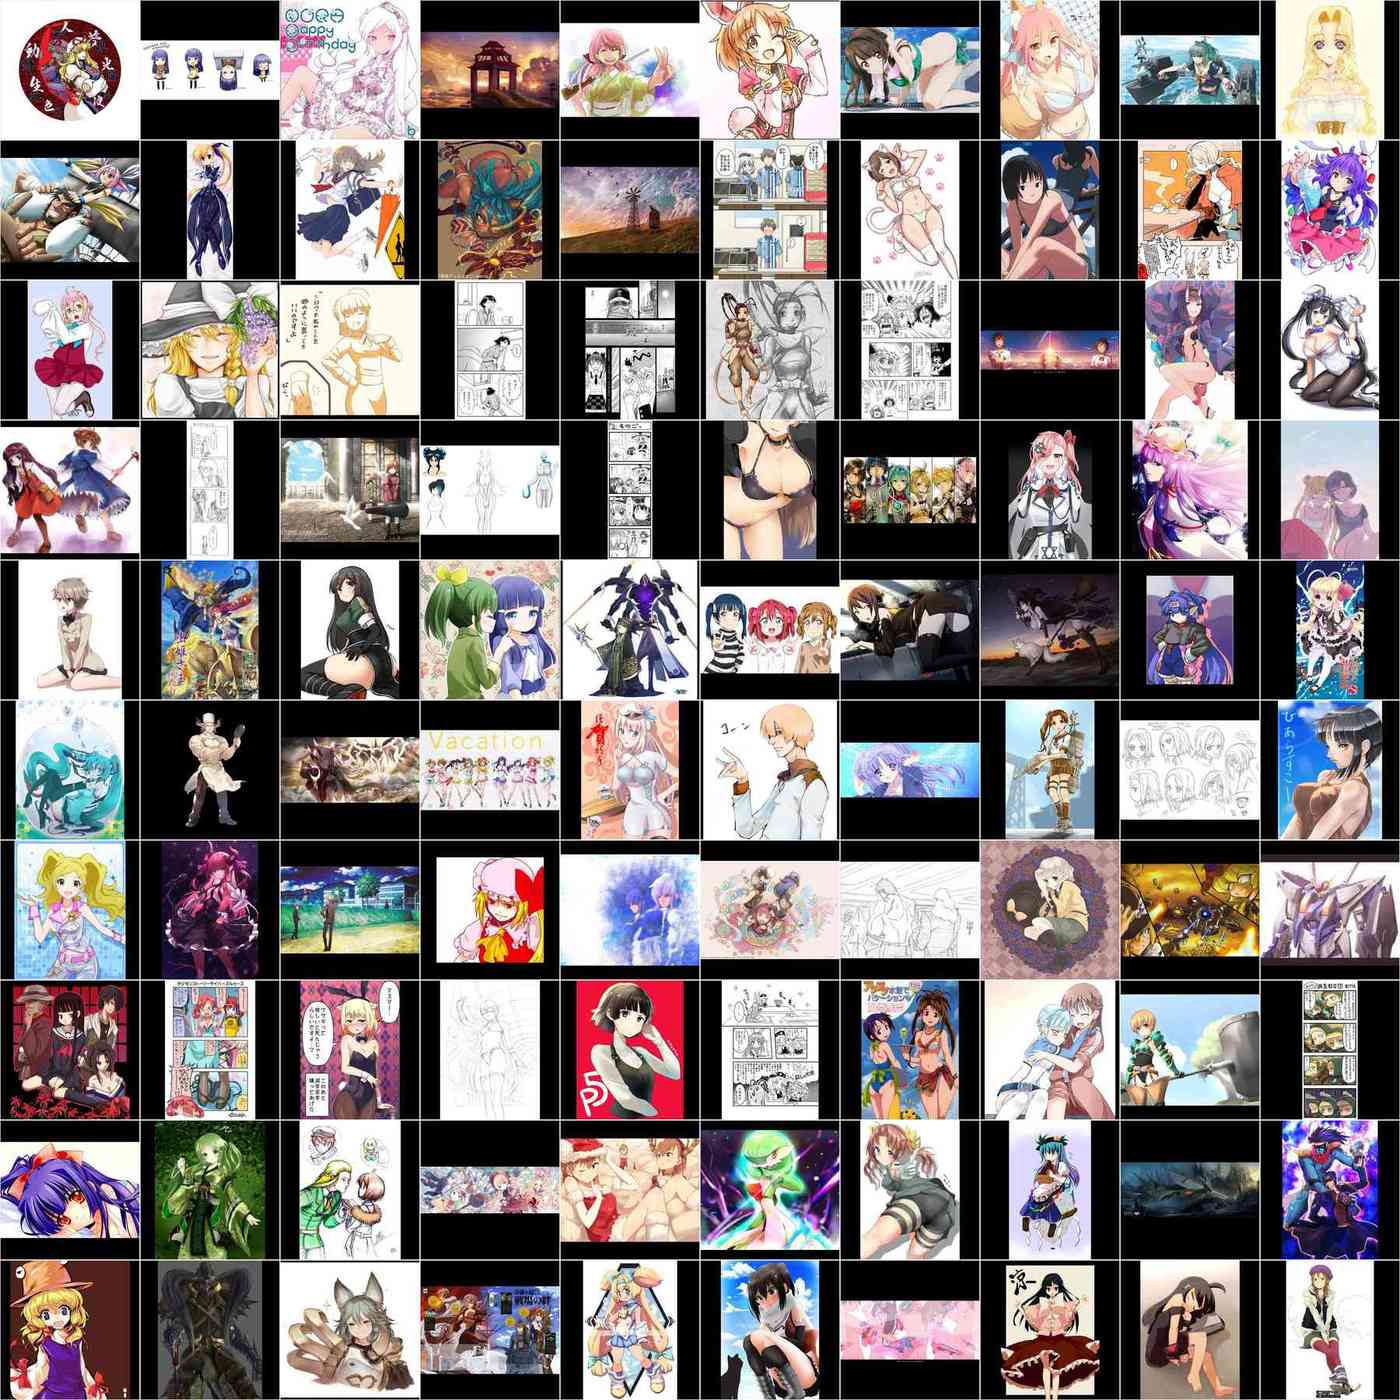 100 random real sample images from the 512px SFW subset of Danbooru in a 10×10 grid.